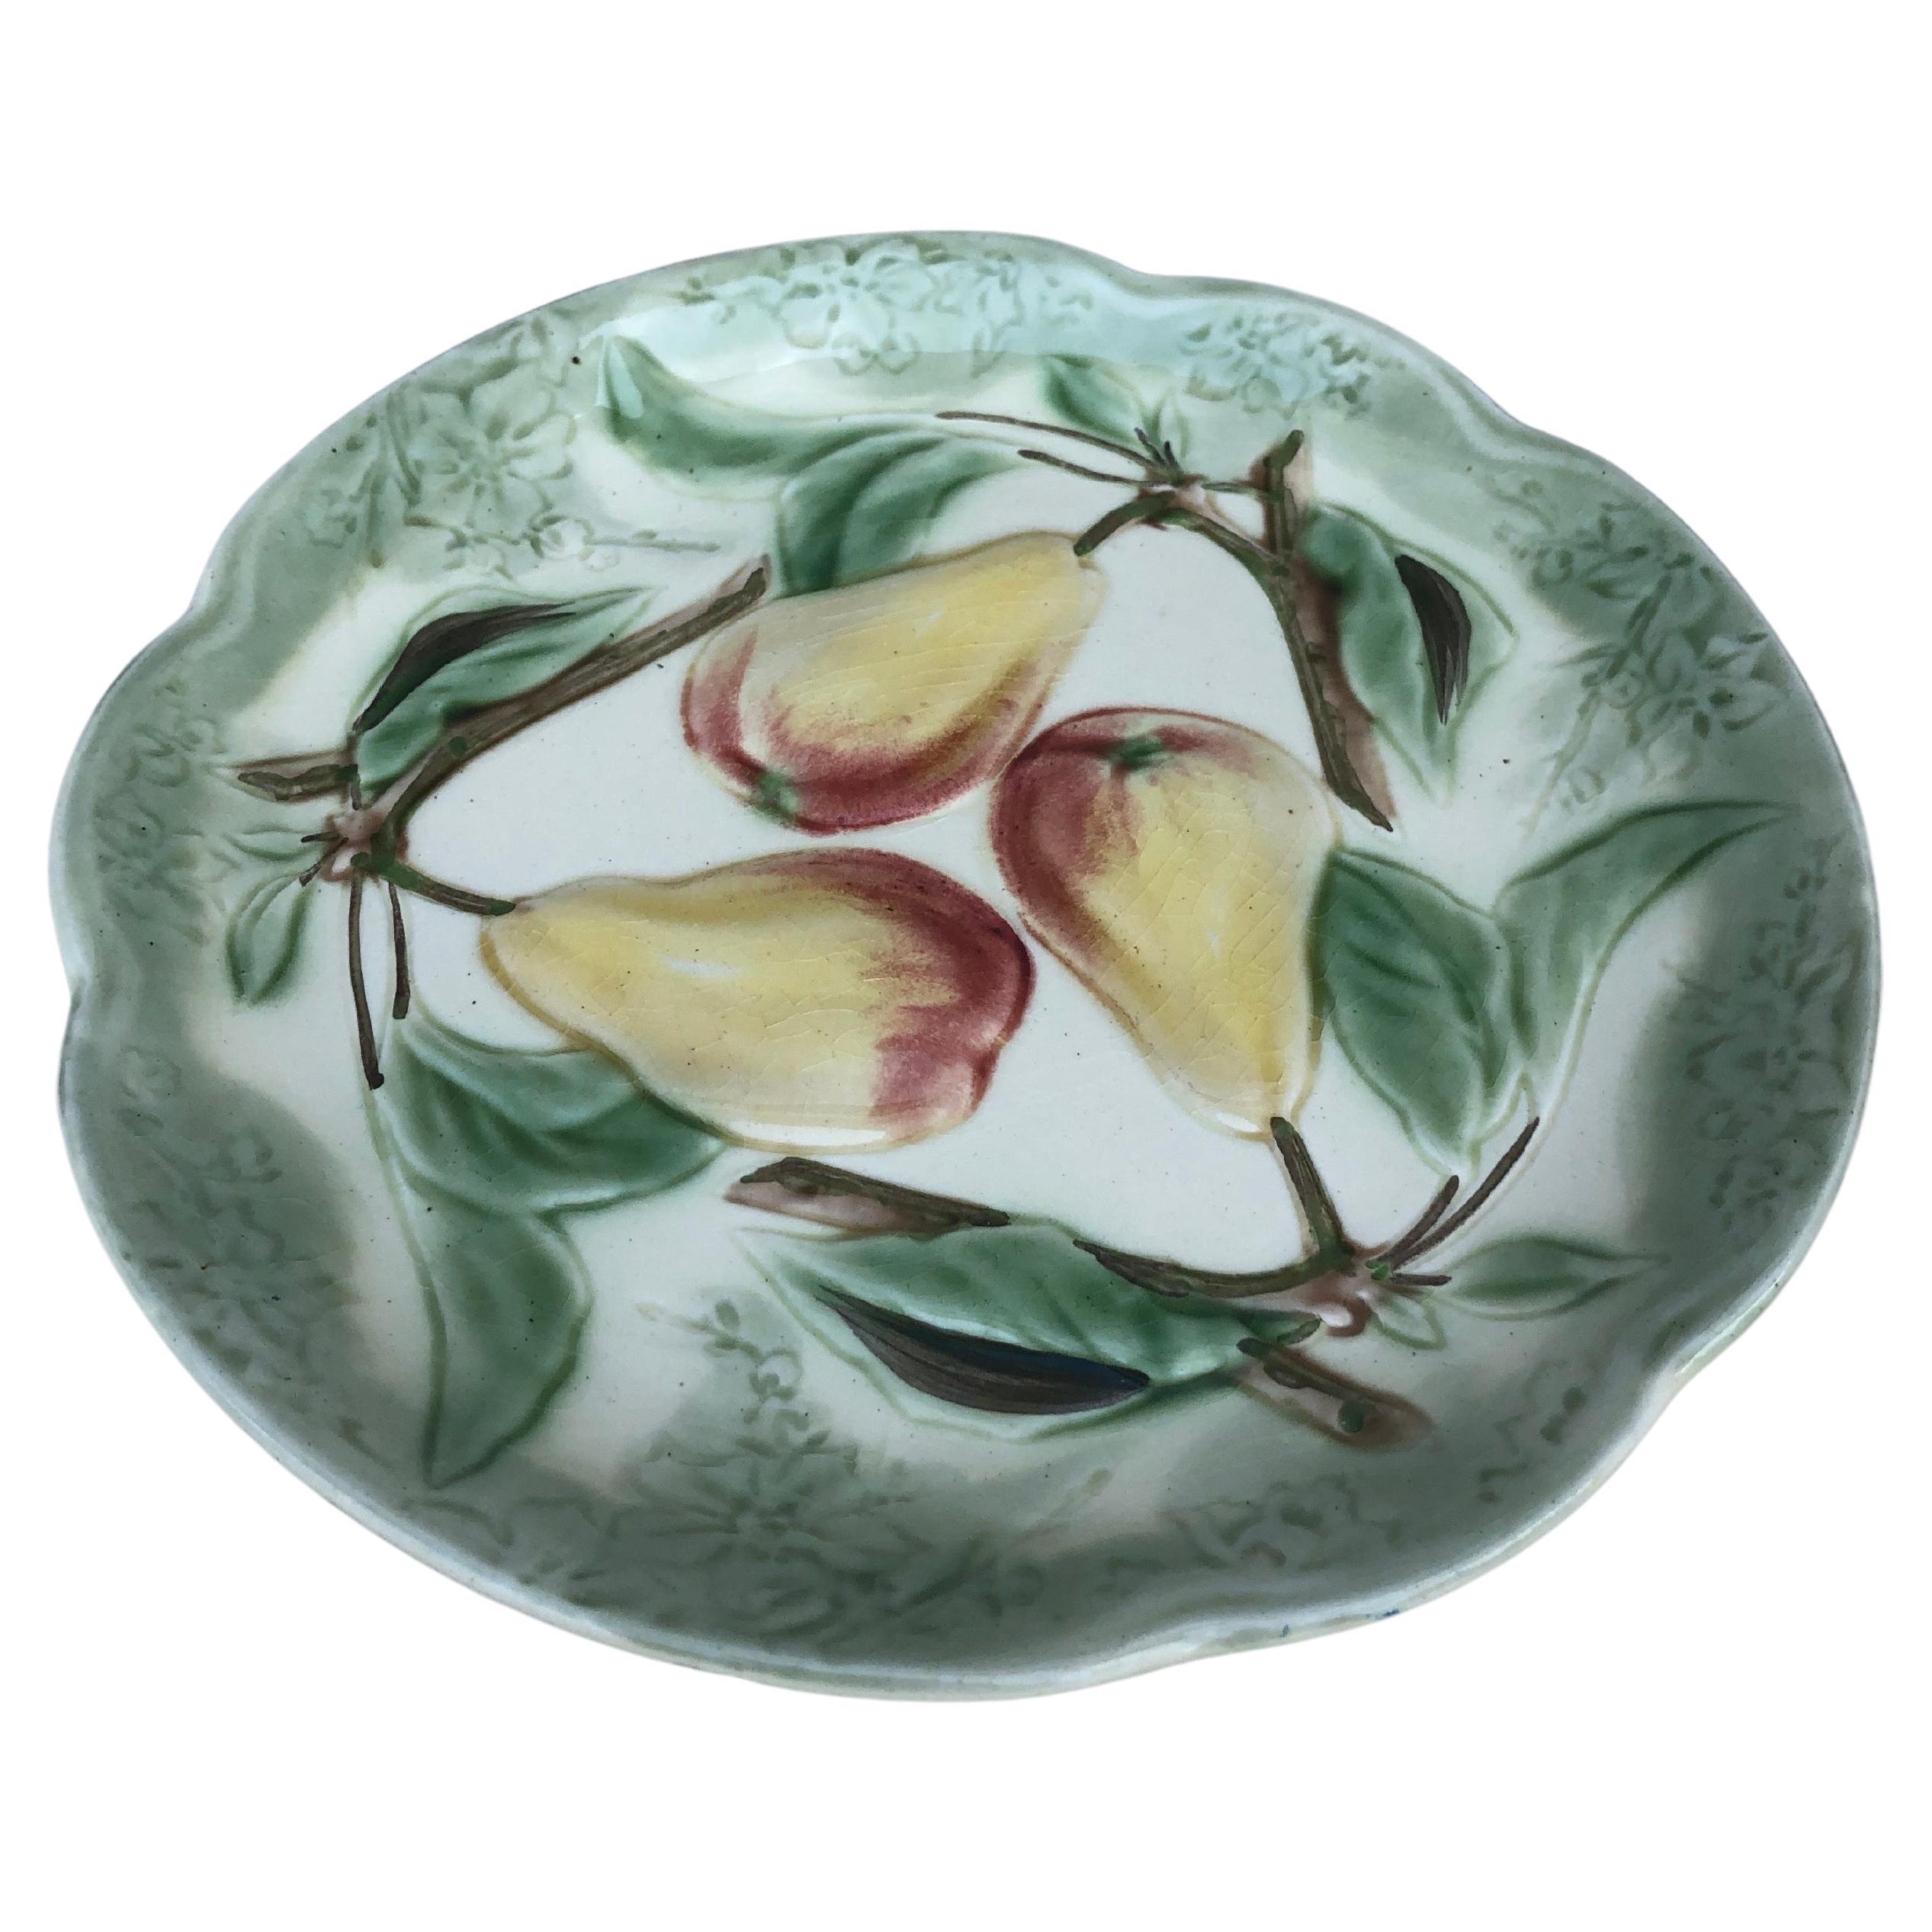 19th century Majolica pears plate signed Choisy Le Roi.
Made for higgins & setter New York.
The higgins & hetter Company of New York City began selling decorations for the table, including rich-cut glass in 1887. By 1891 the firm was